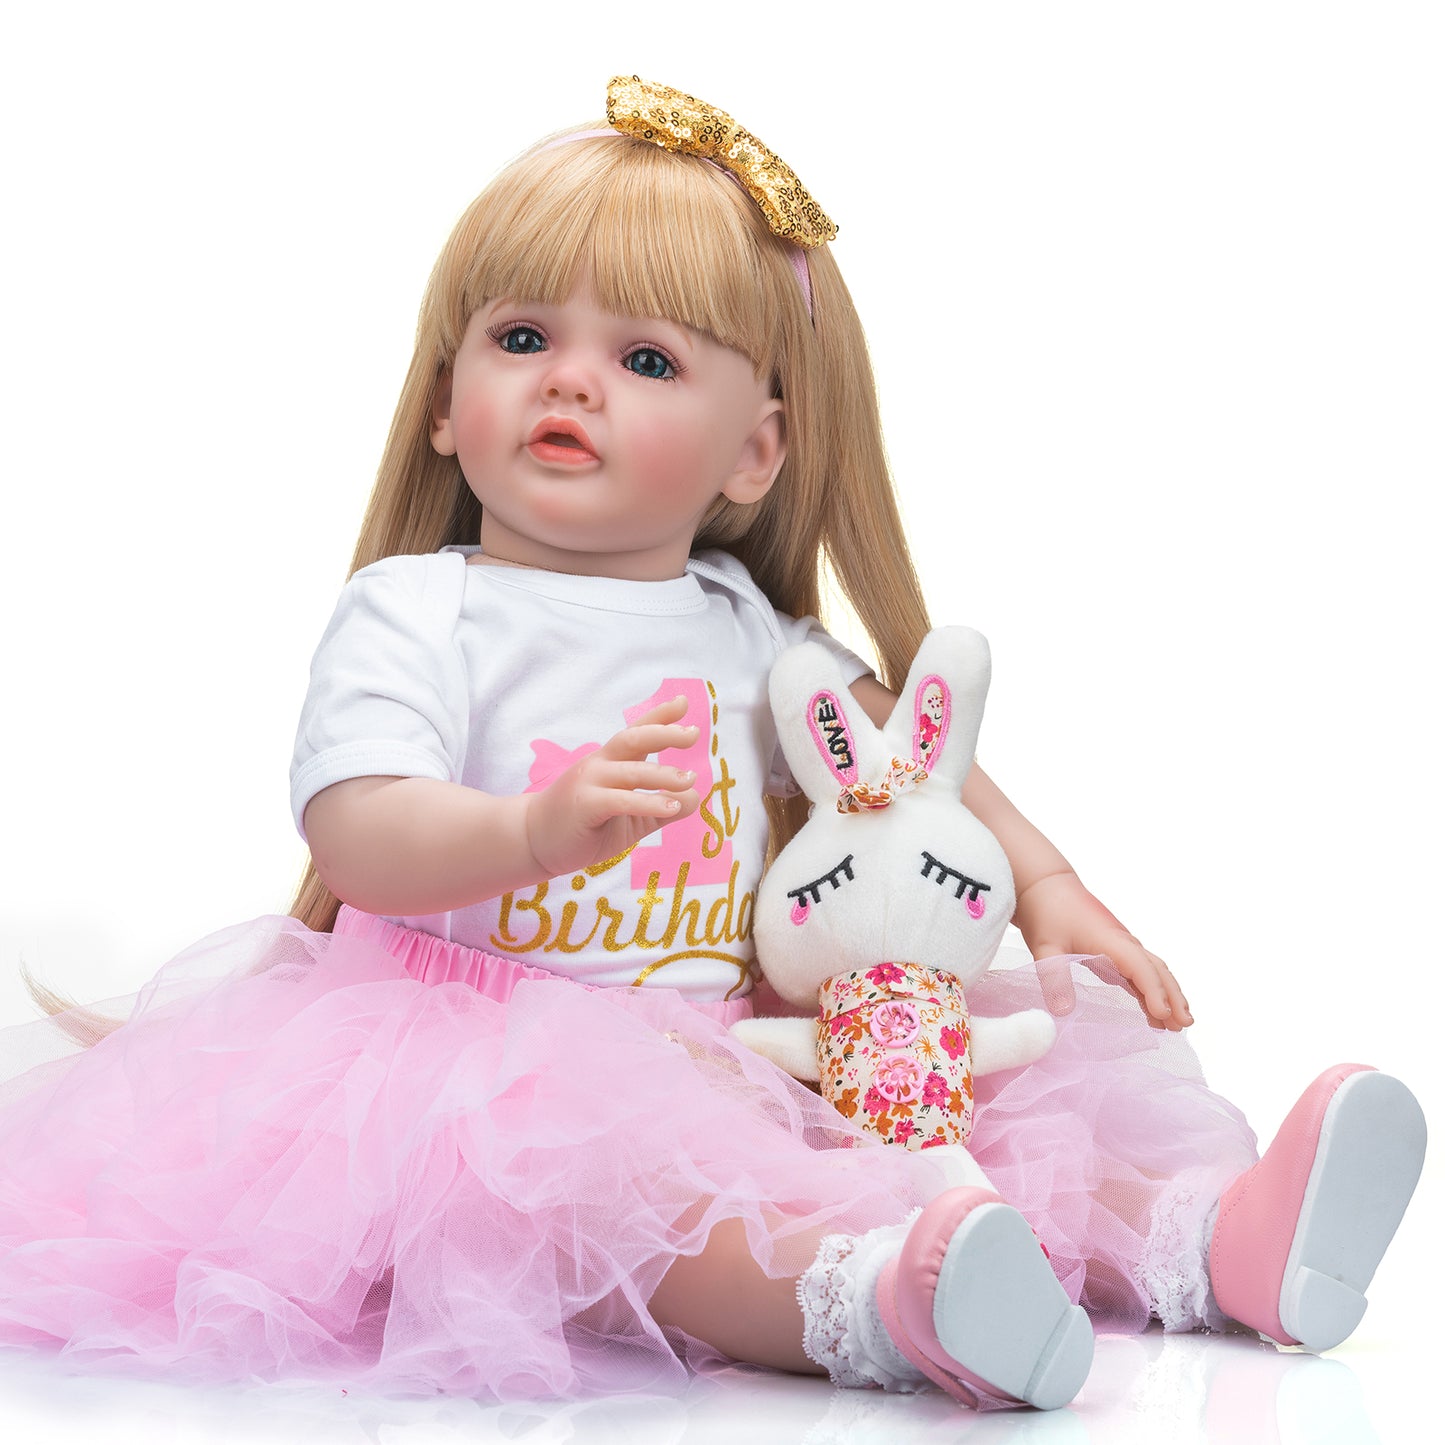 Lifelike Reborn Baby Dolls That Look Real 60CM Standing Toddler Princess Girl Doll Long Blonde Hair Pink Dress Soft Cuddly Body Realistic Newborn Baby Dolls for 3+ Year Old Girls